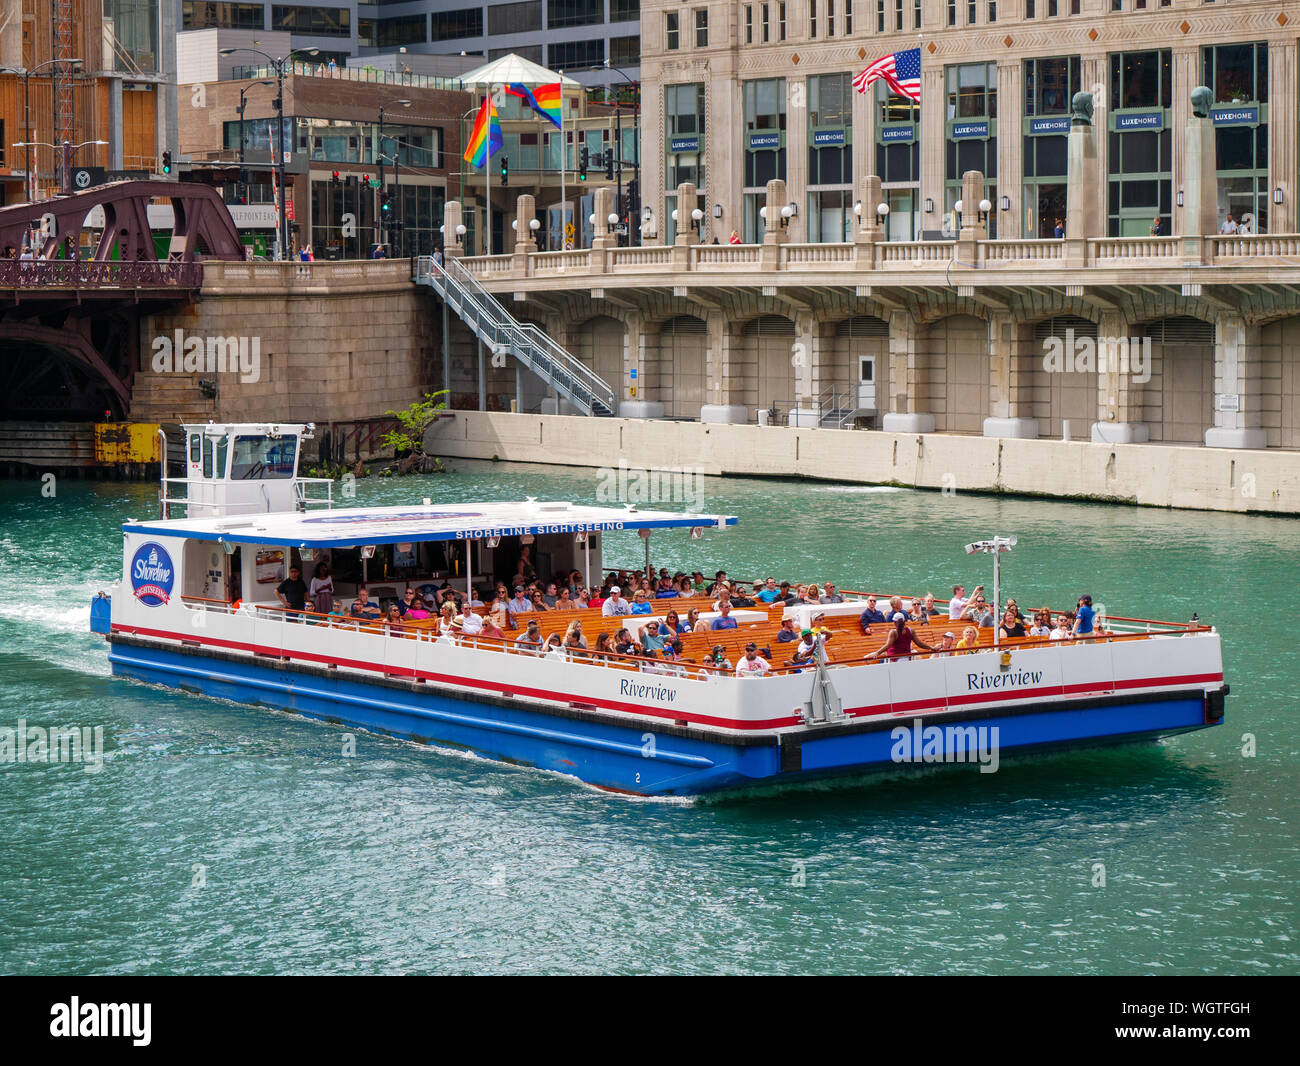 Sightseeing boat, Chicago River. Stock Photo